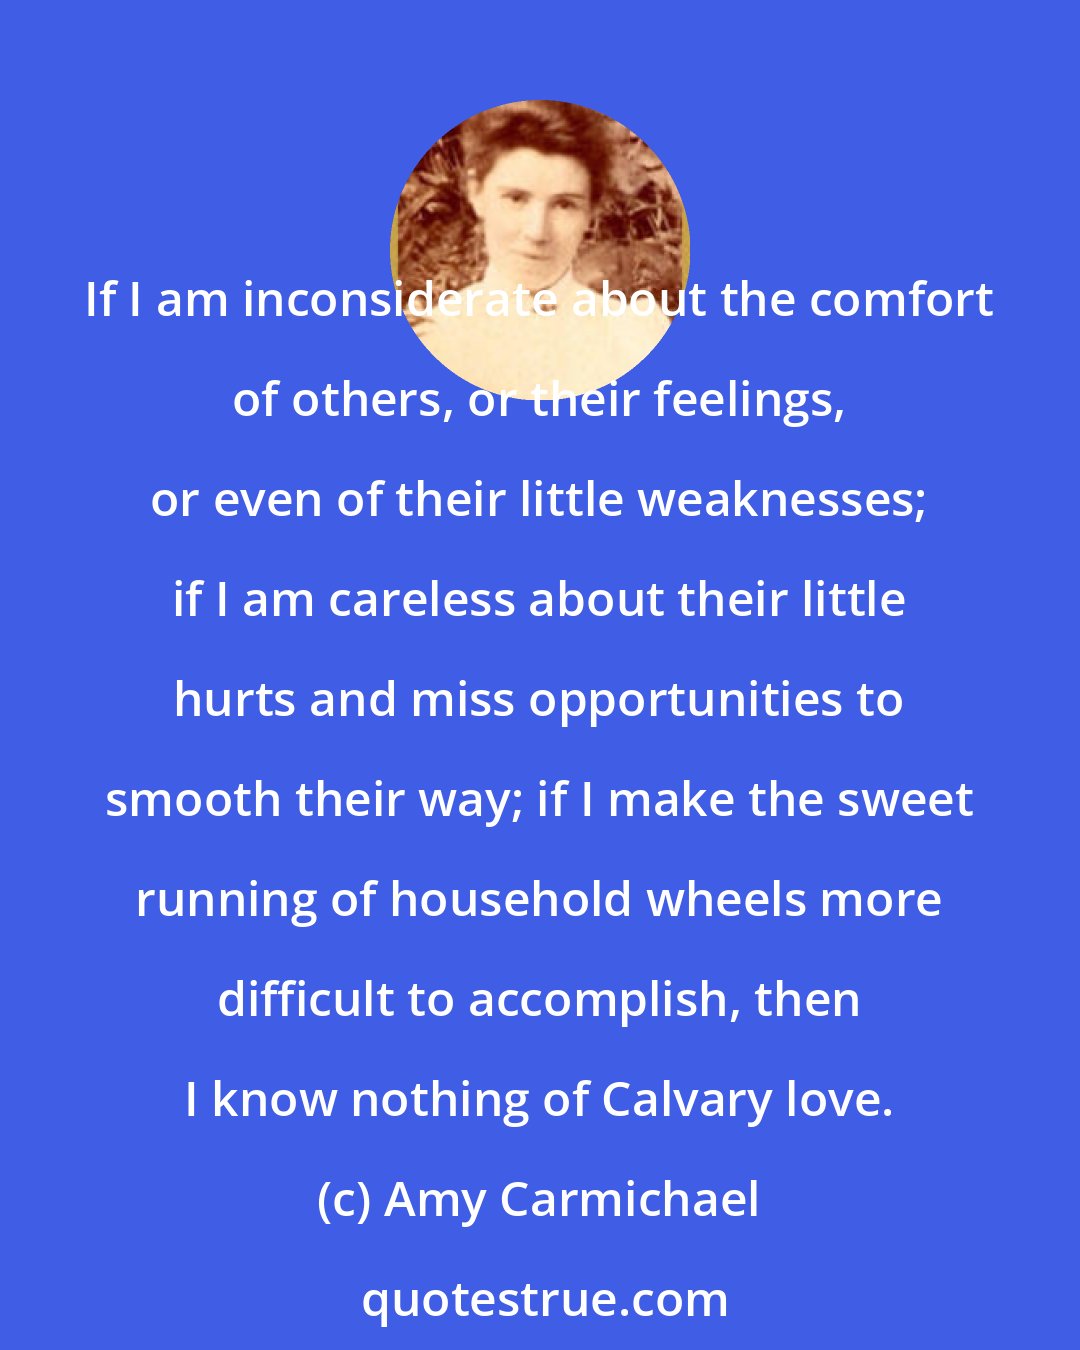 Amy Carmichael: If I am inconsiderate about the comfort of others, or their feelings, or even of their little weaknesses; if I am careless about their little hurts and miss opportunities to smooth their way; if I make the sweet running of household wheels more difficult to accomplish, then I know nothing of Calvary love.